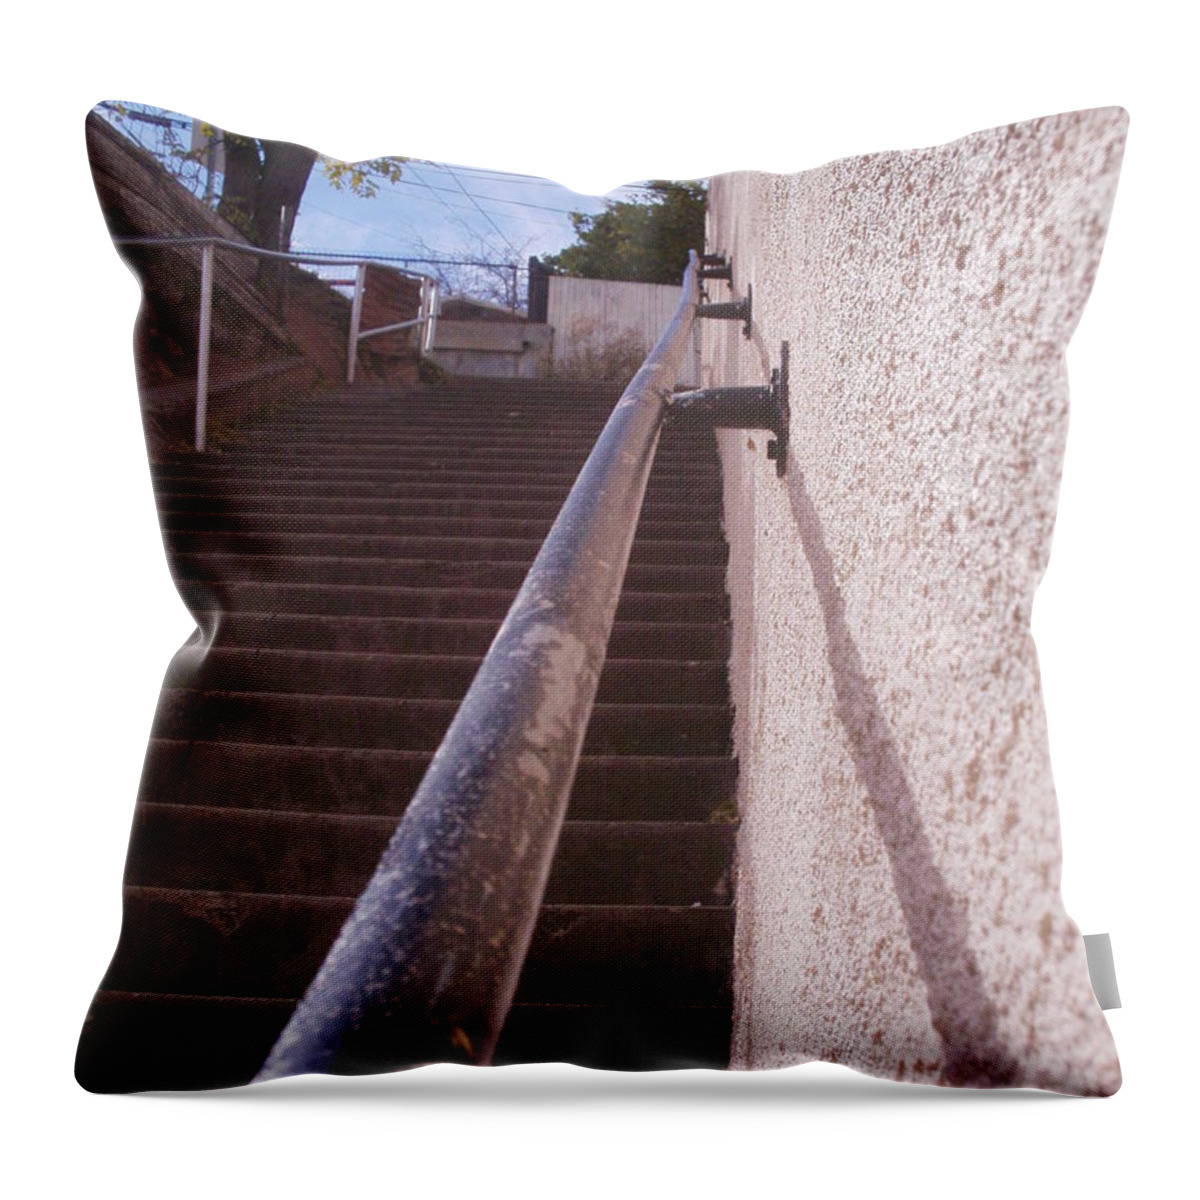 Bisbee Throw Pillow featuring the photograph Stairs by David S Reynolds